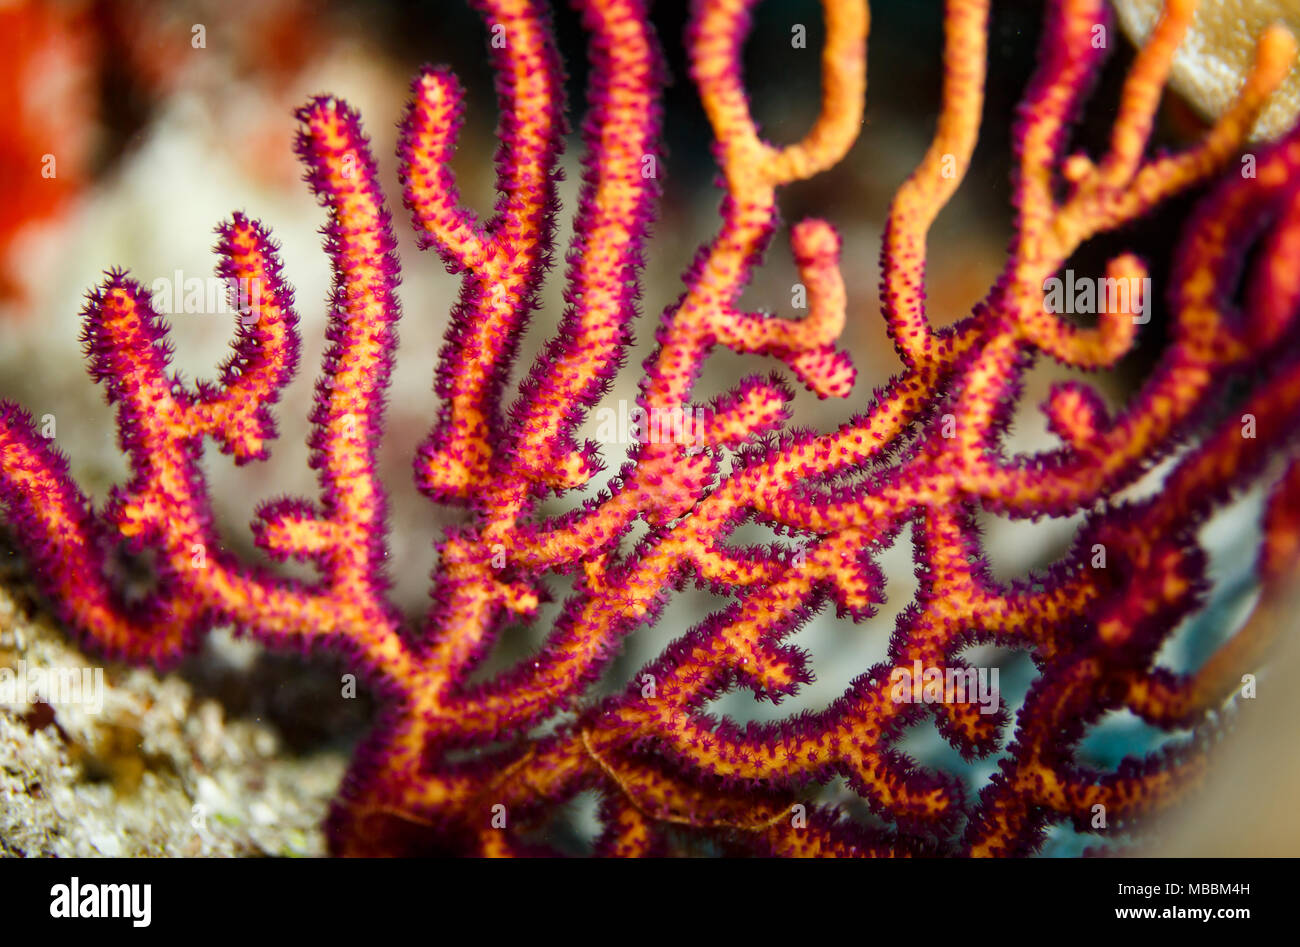 Colorful pattern of orange and yellow  branching coral,  Acropora florida Stock Photo